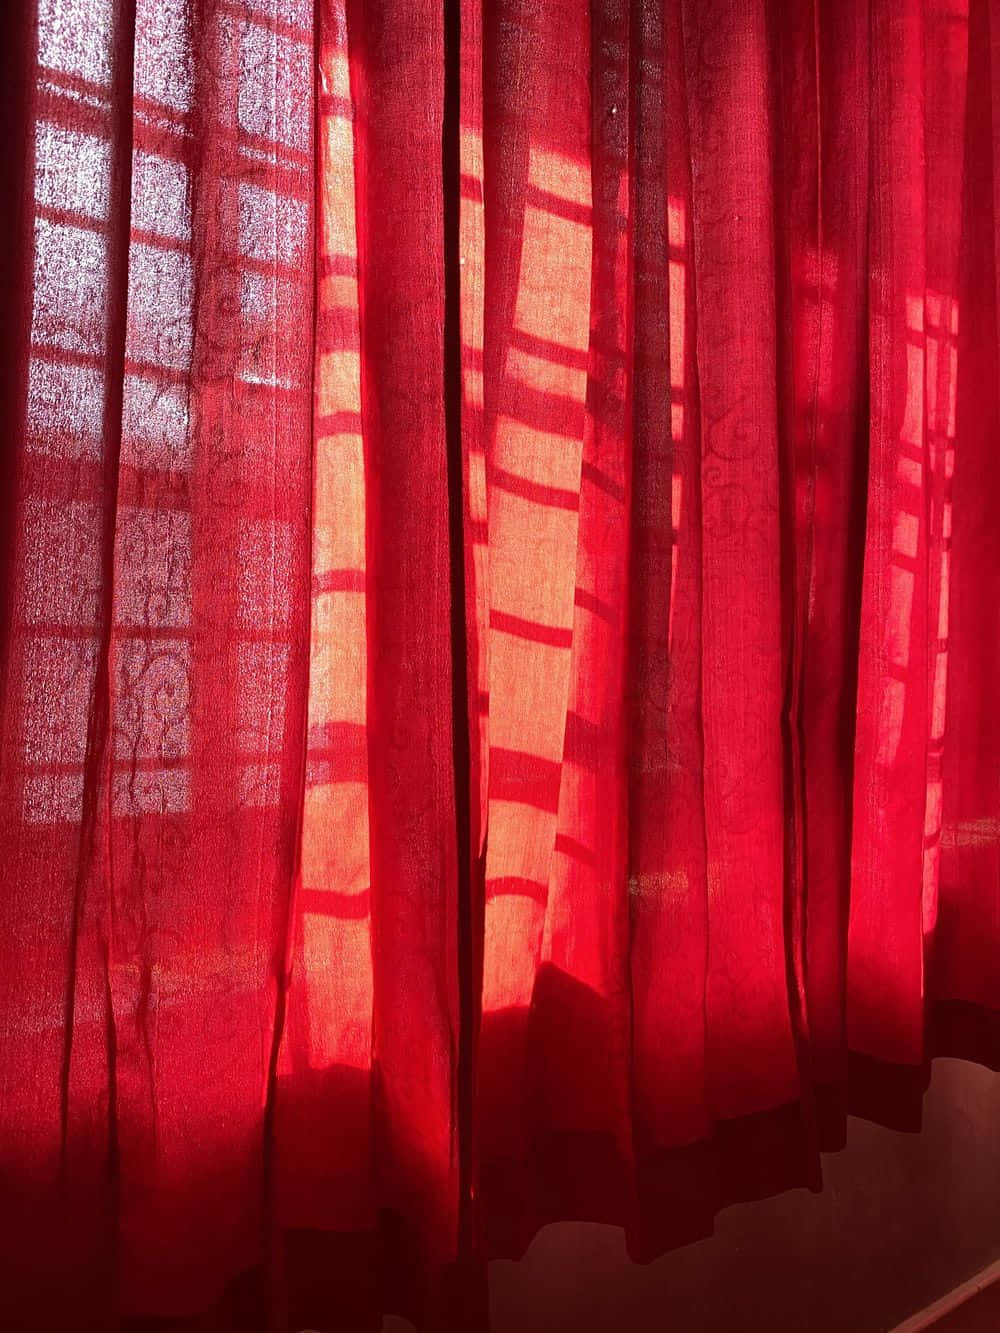 Red Curtains In A Room With Sunlight